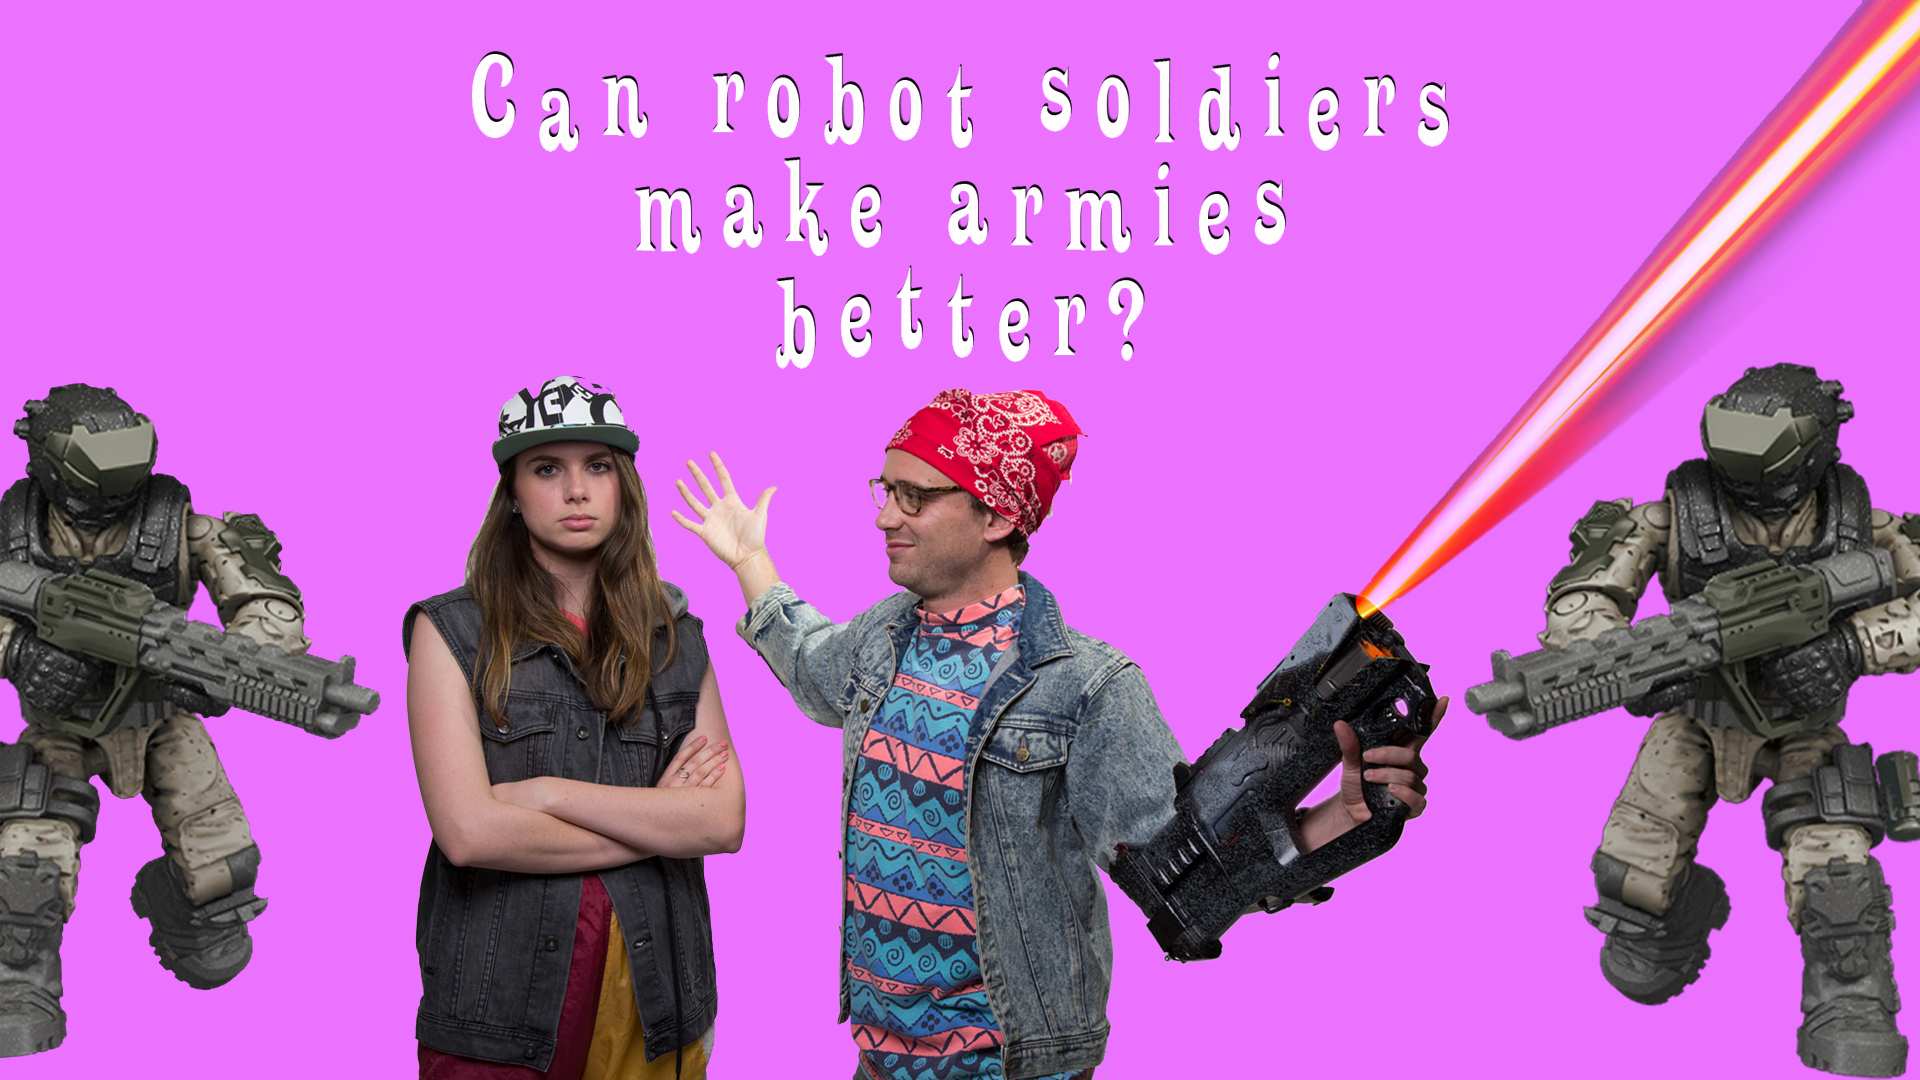 Can robot soldiers make armies better?